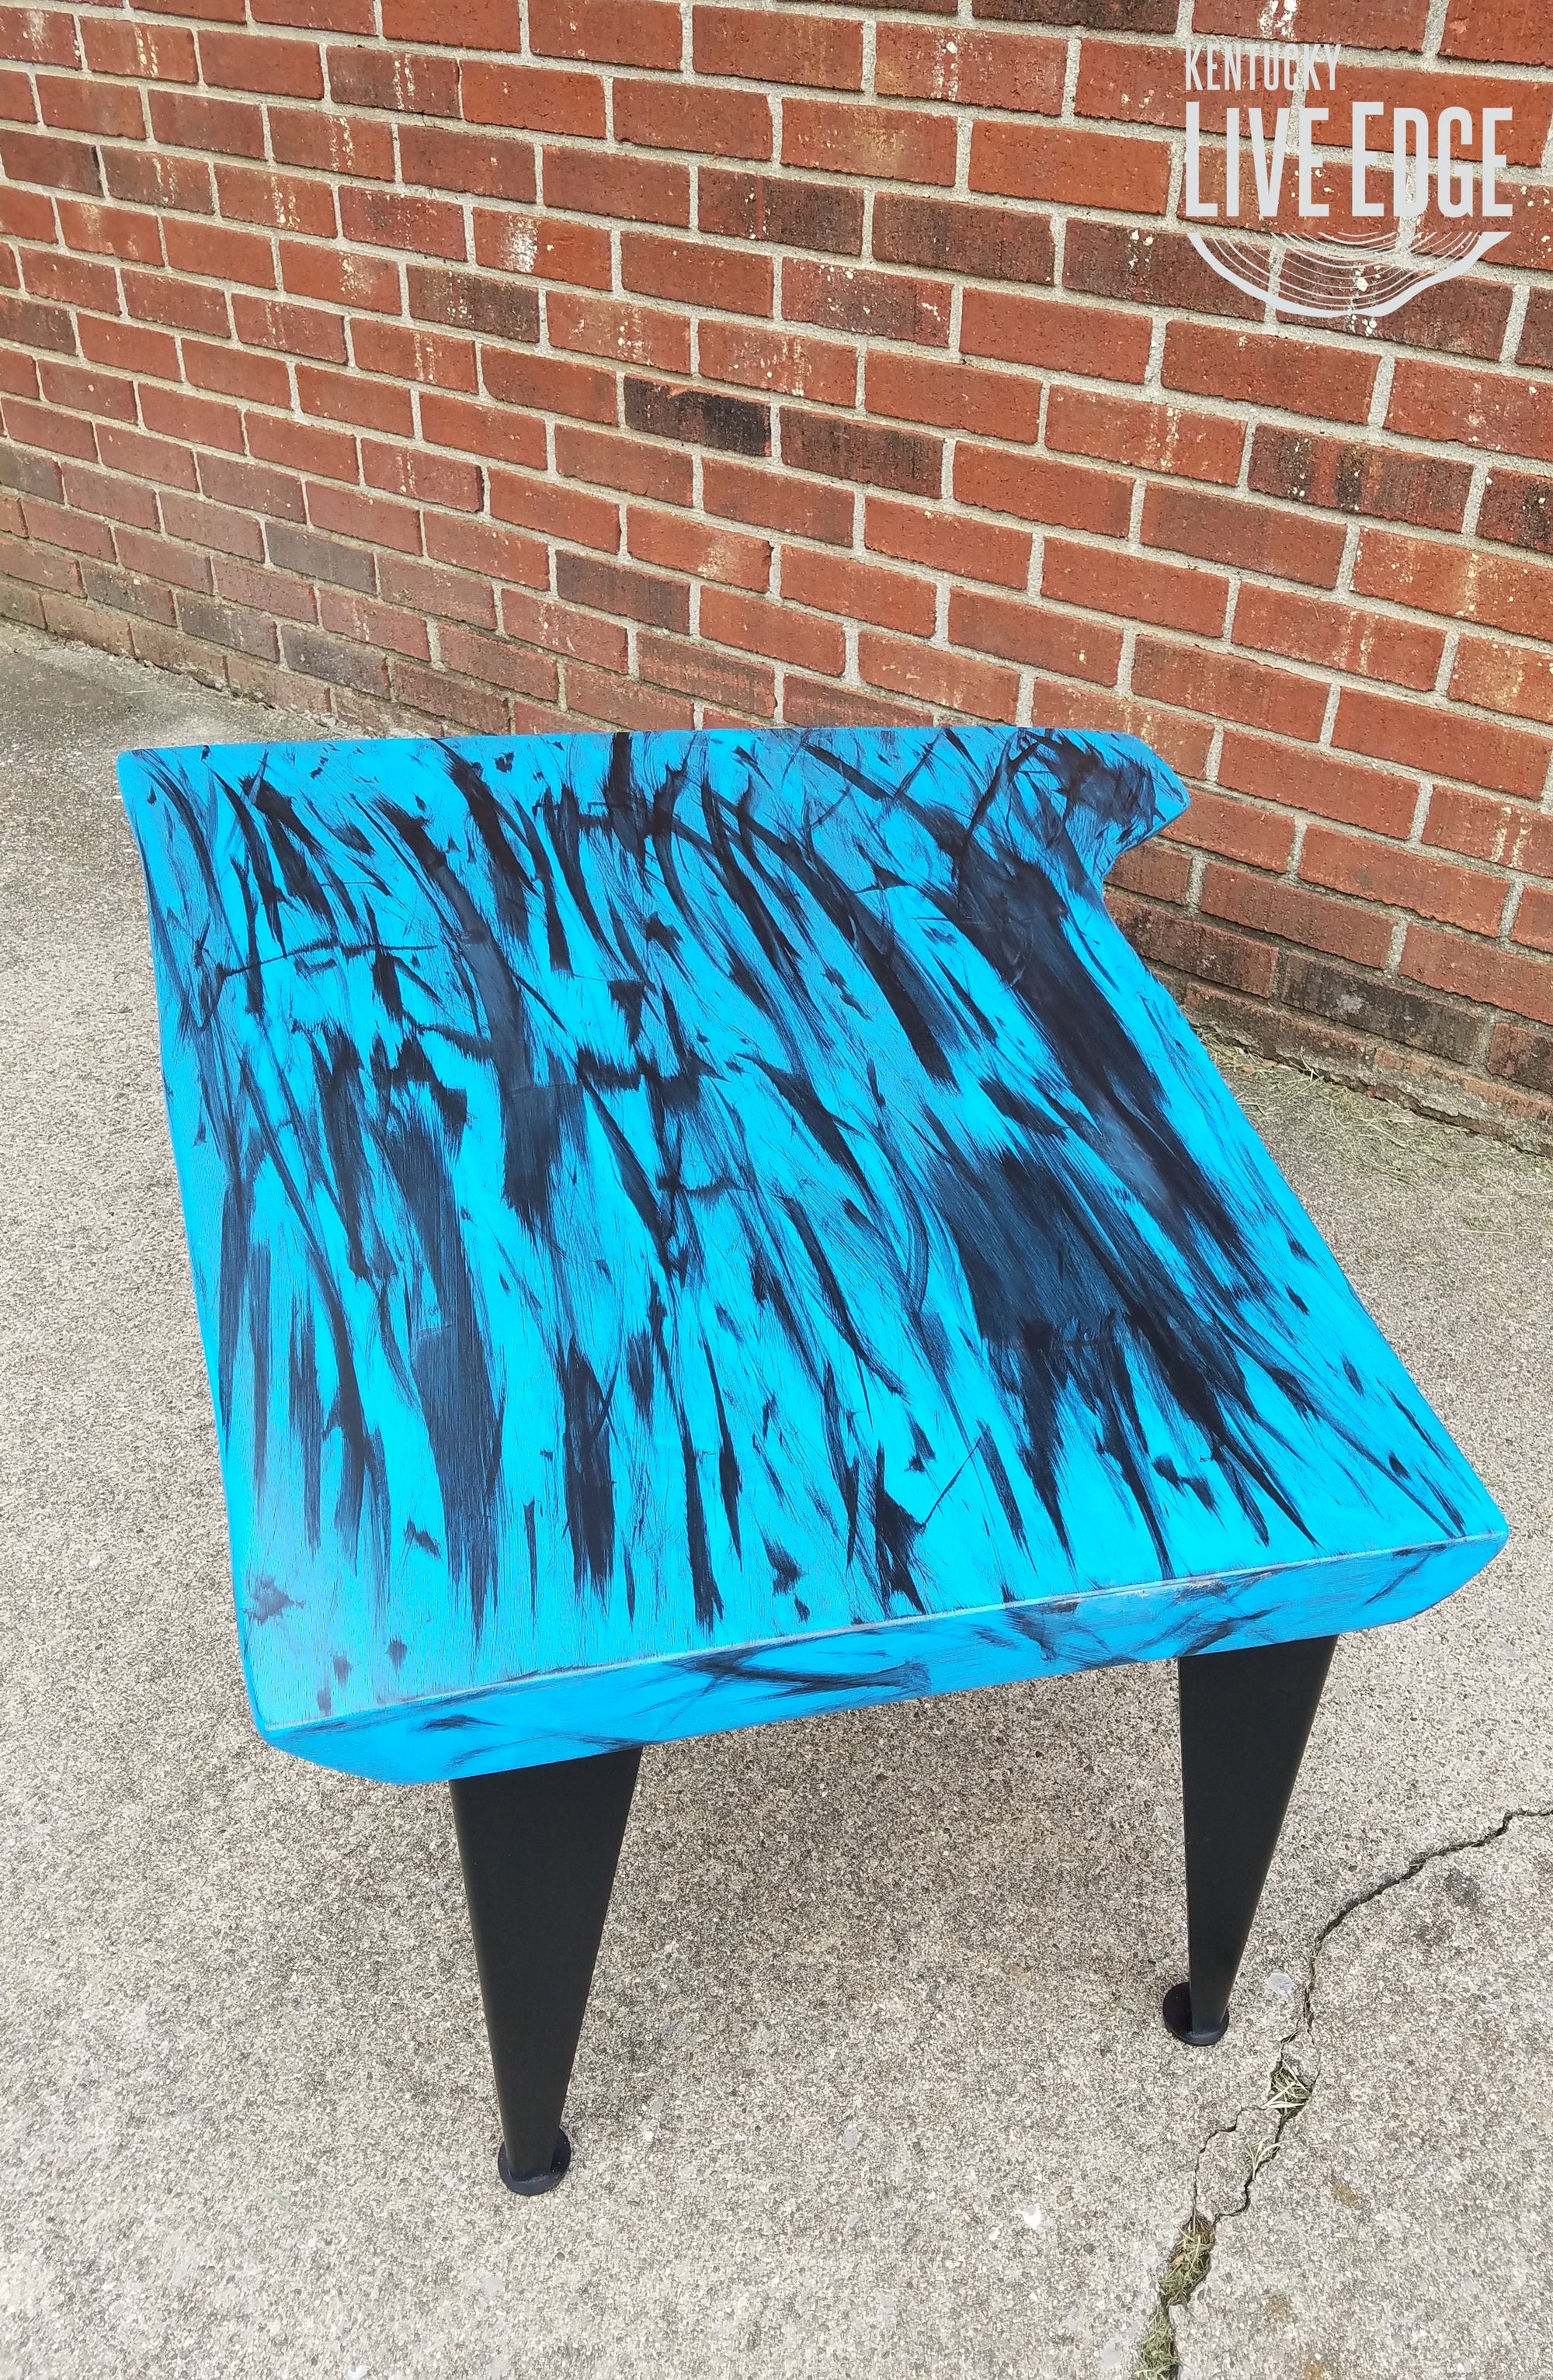 Royal Blue Coffee Table- Live Edge Coffee Table- Walnut- Modern- Contemporary- Furniture- Handpainted- Graffiti- Abstract- Industrial- Cool